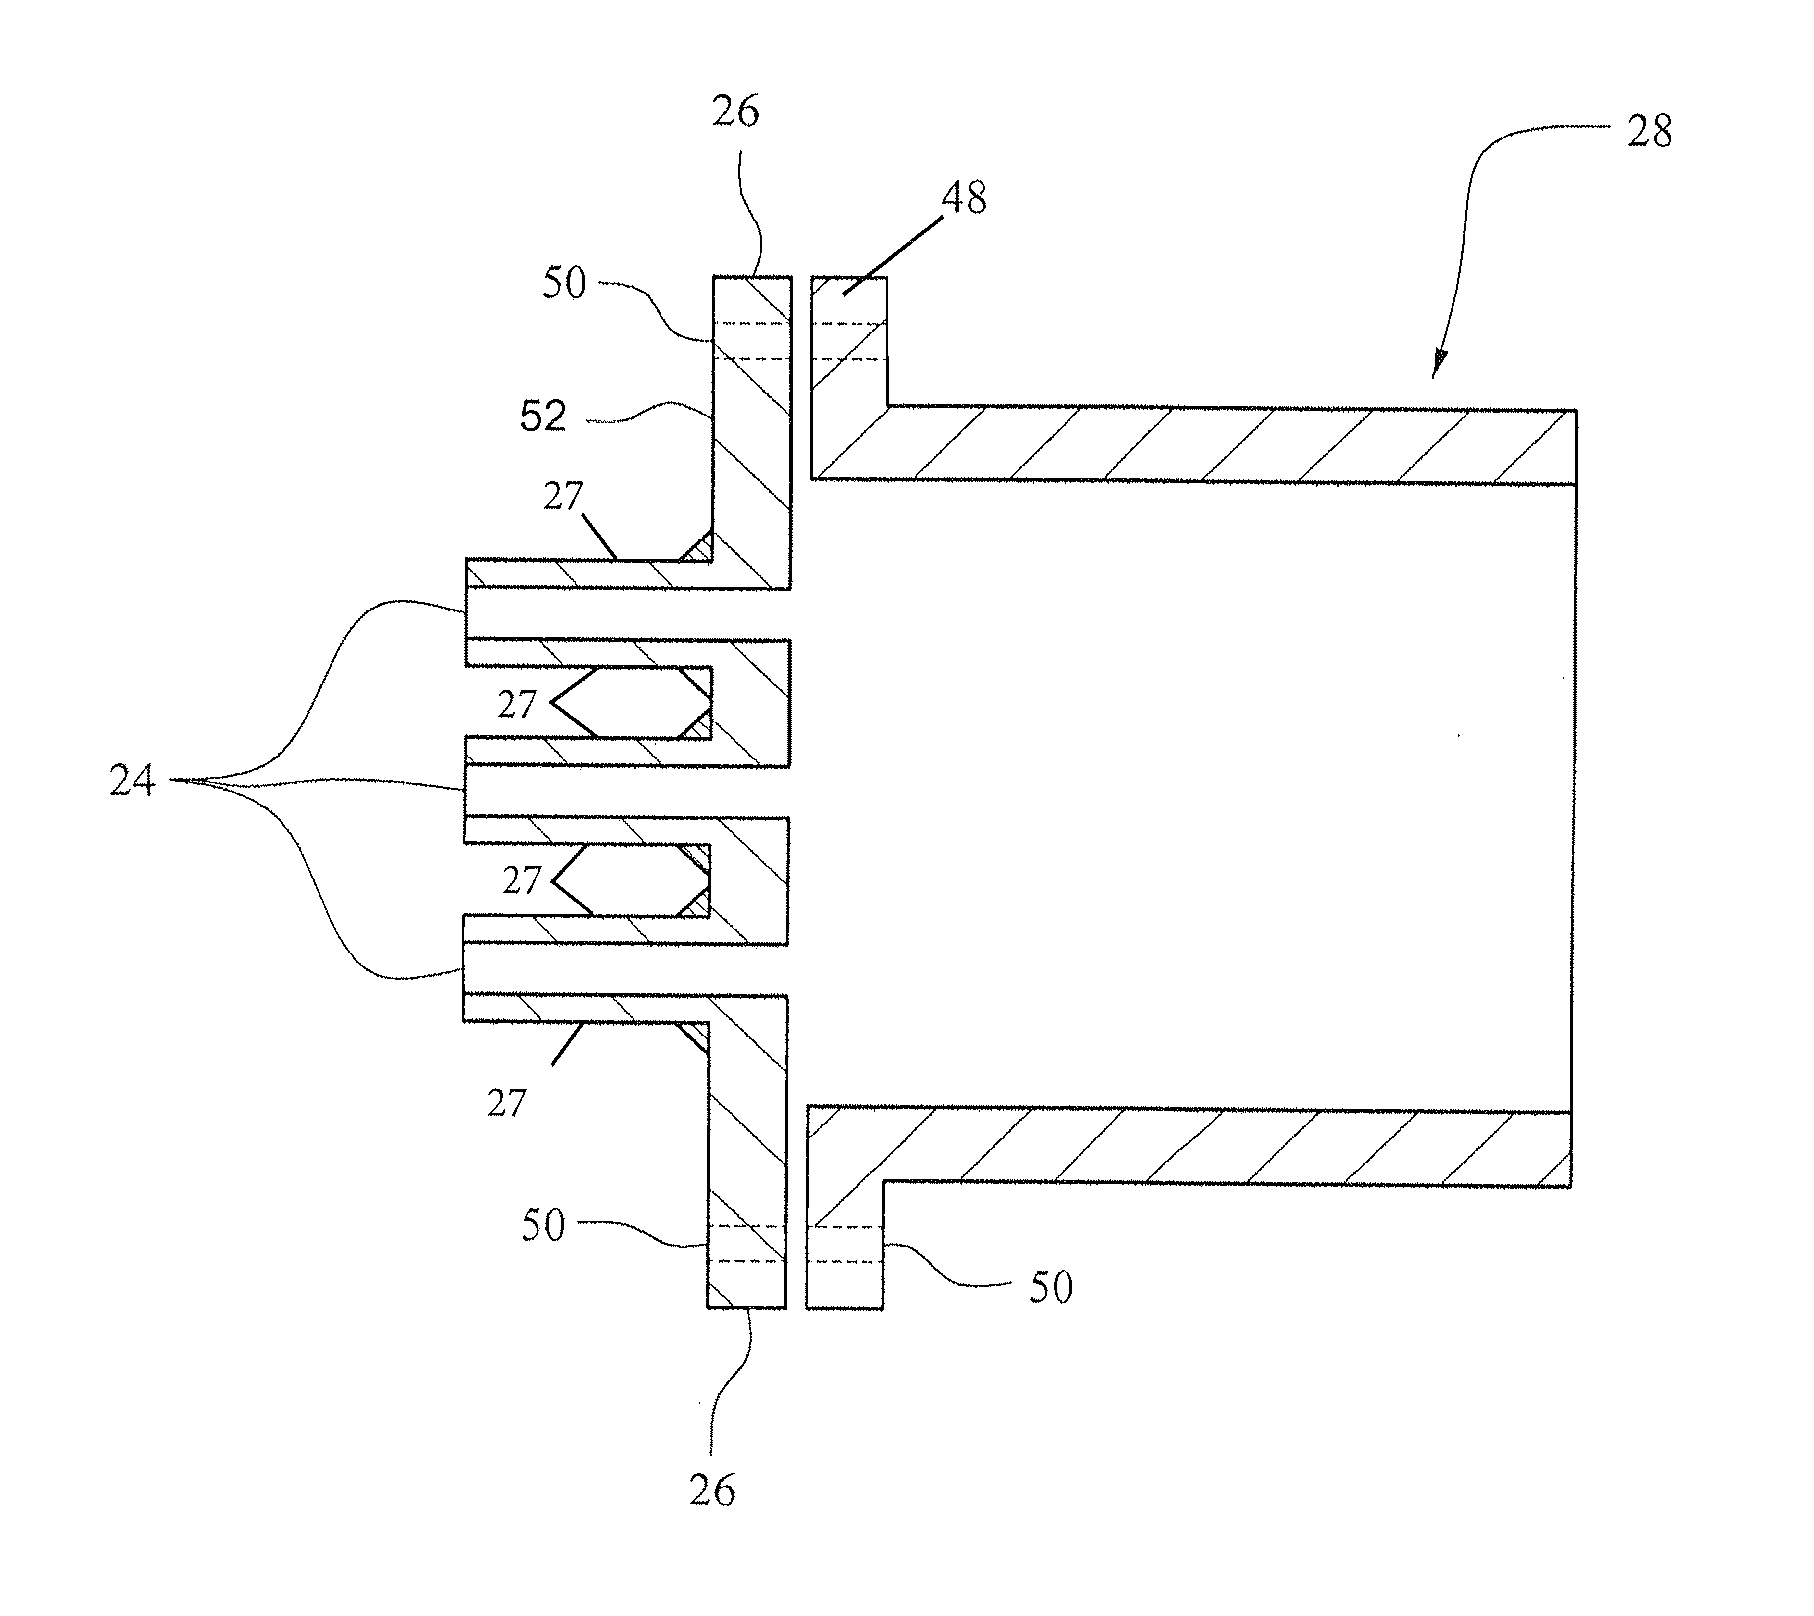 Piping system from reactor to separator and method to control process flow